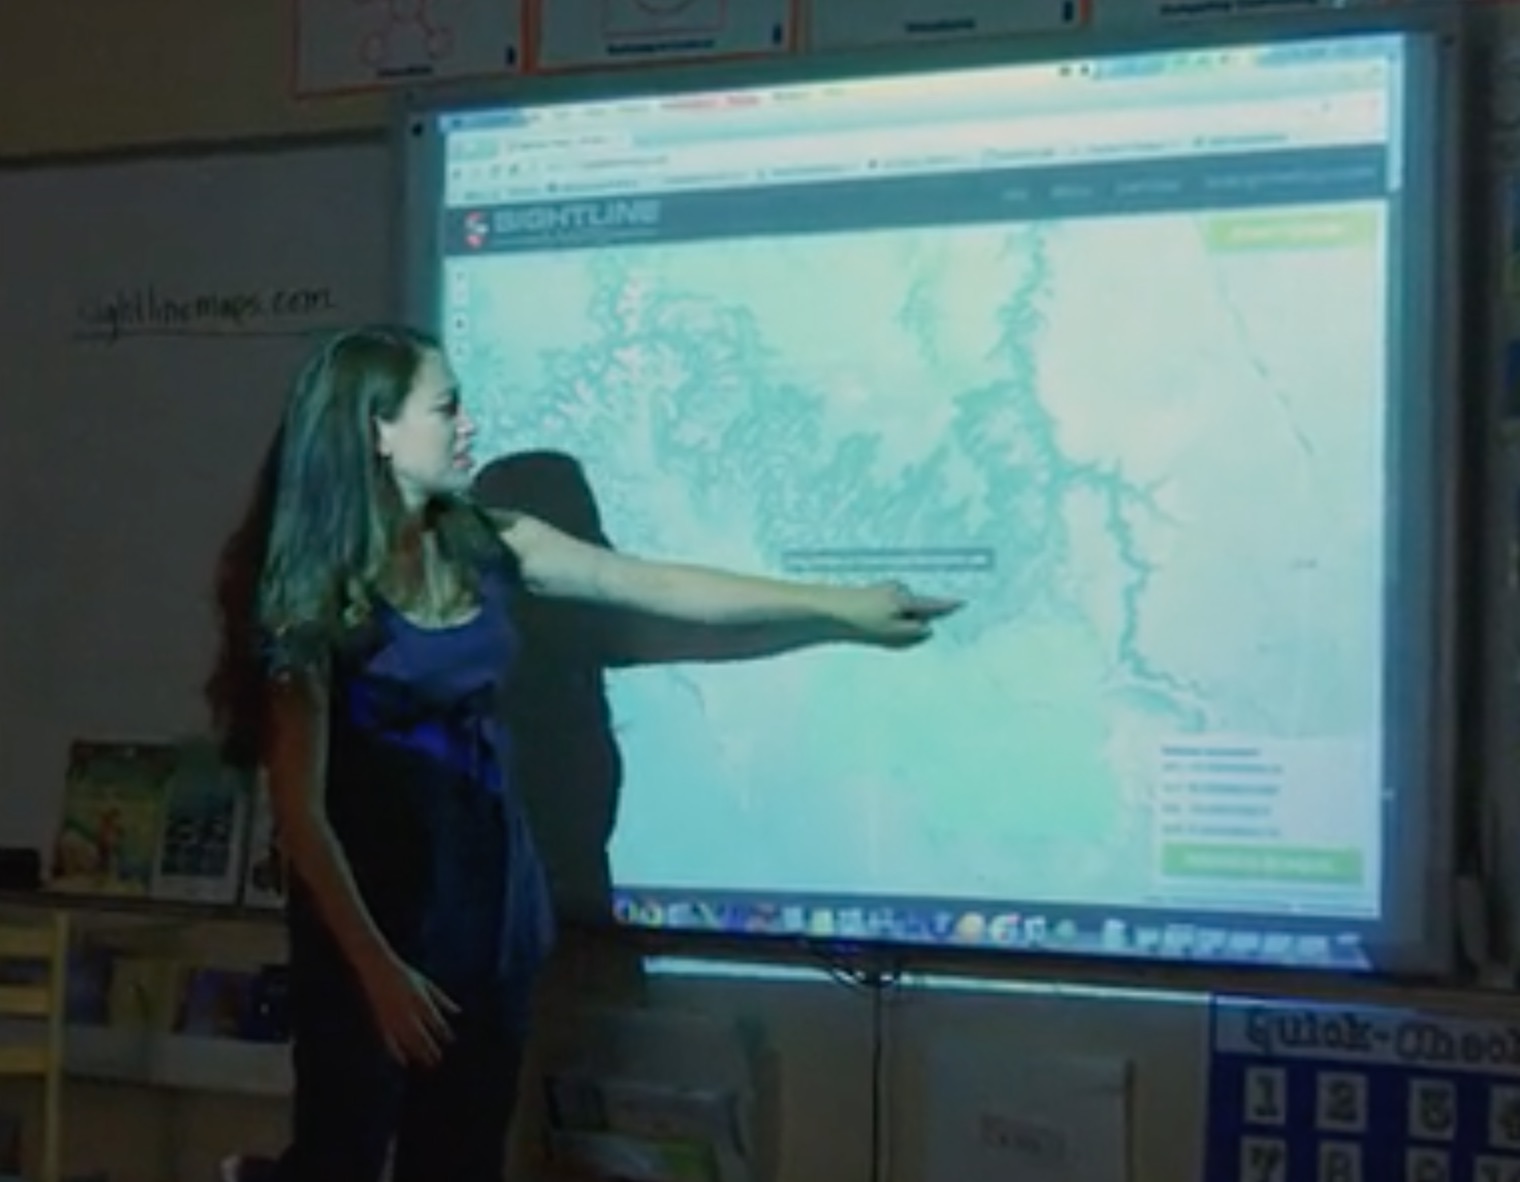  Educators can make very good use of Sightline Maps' new service 